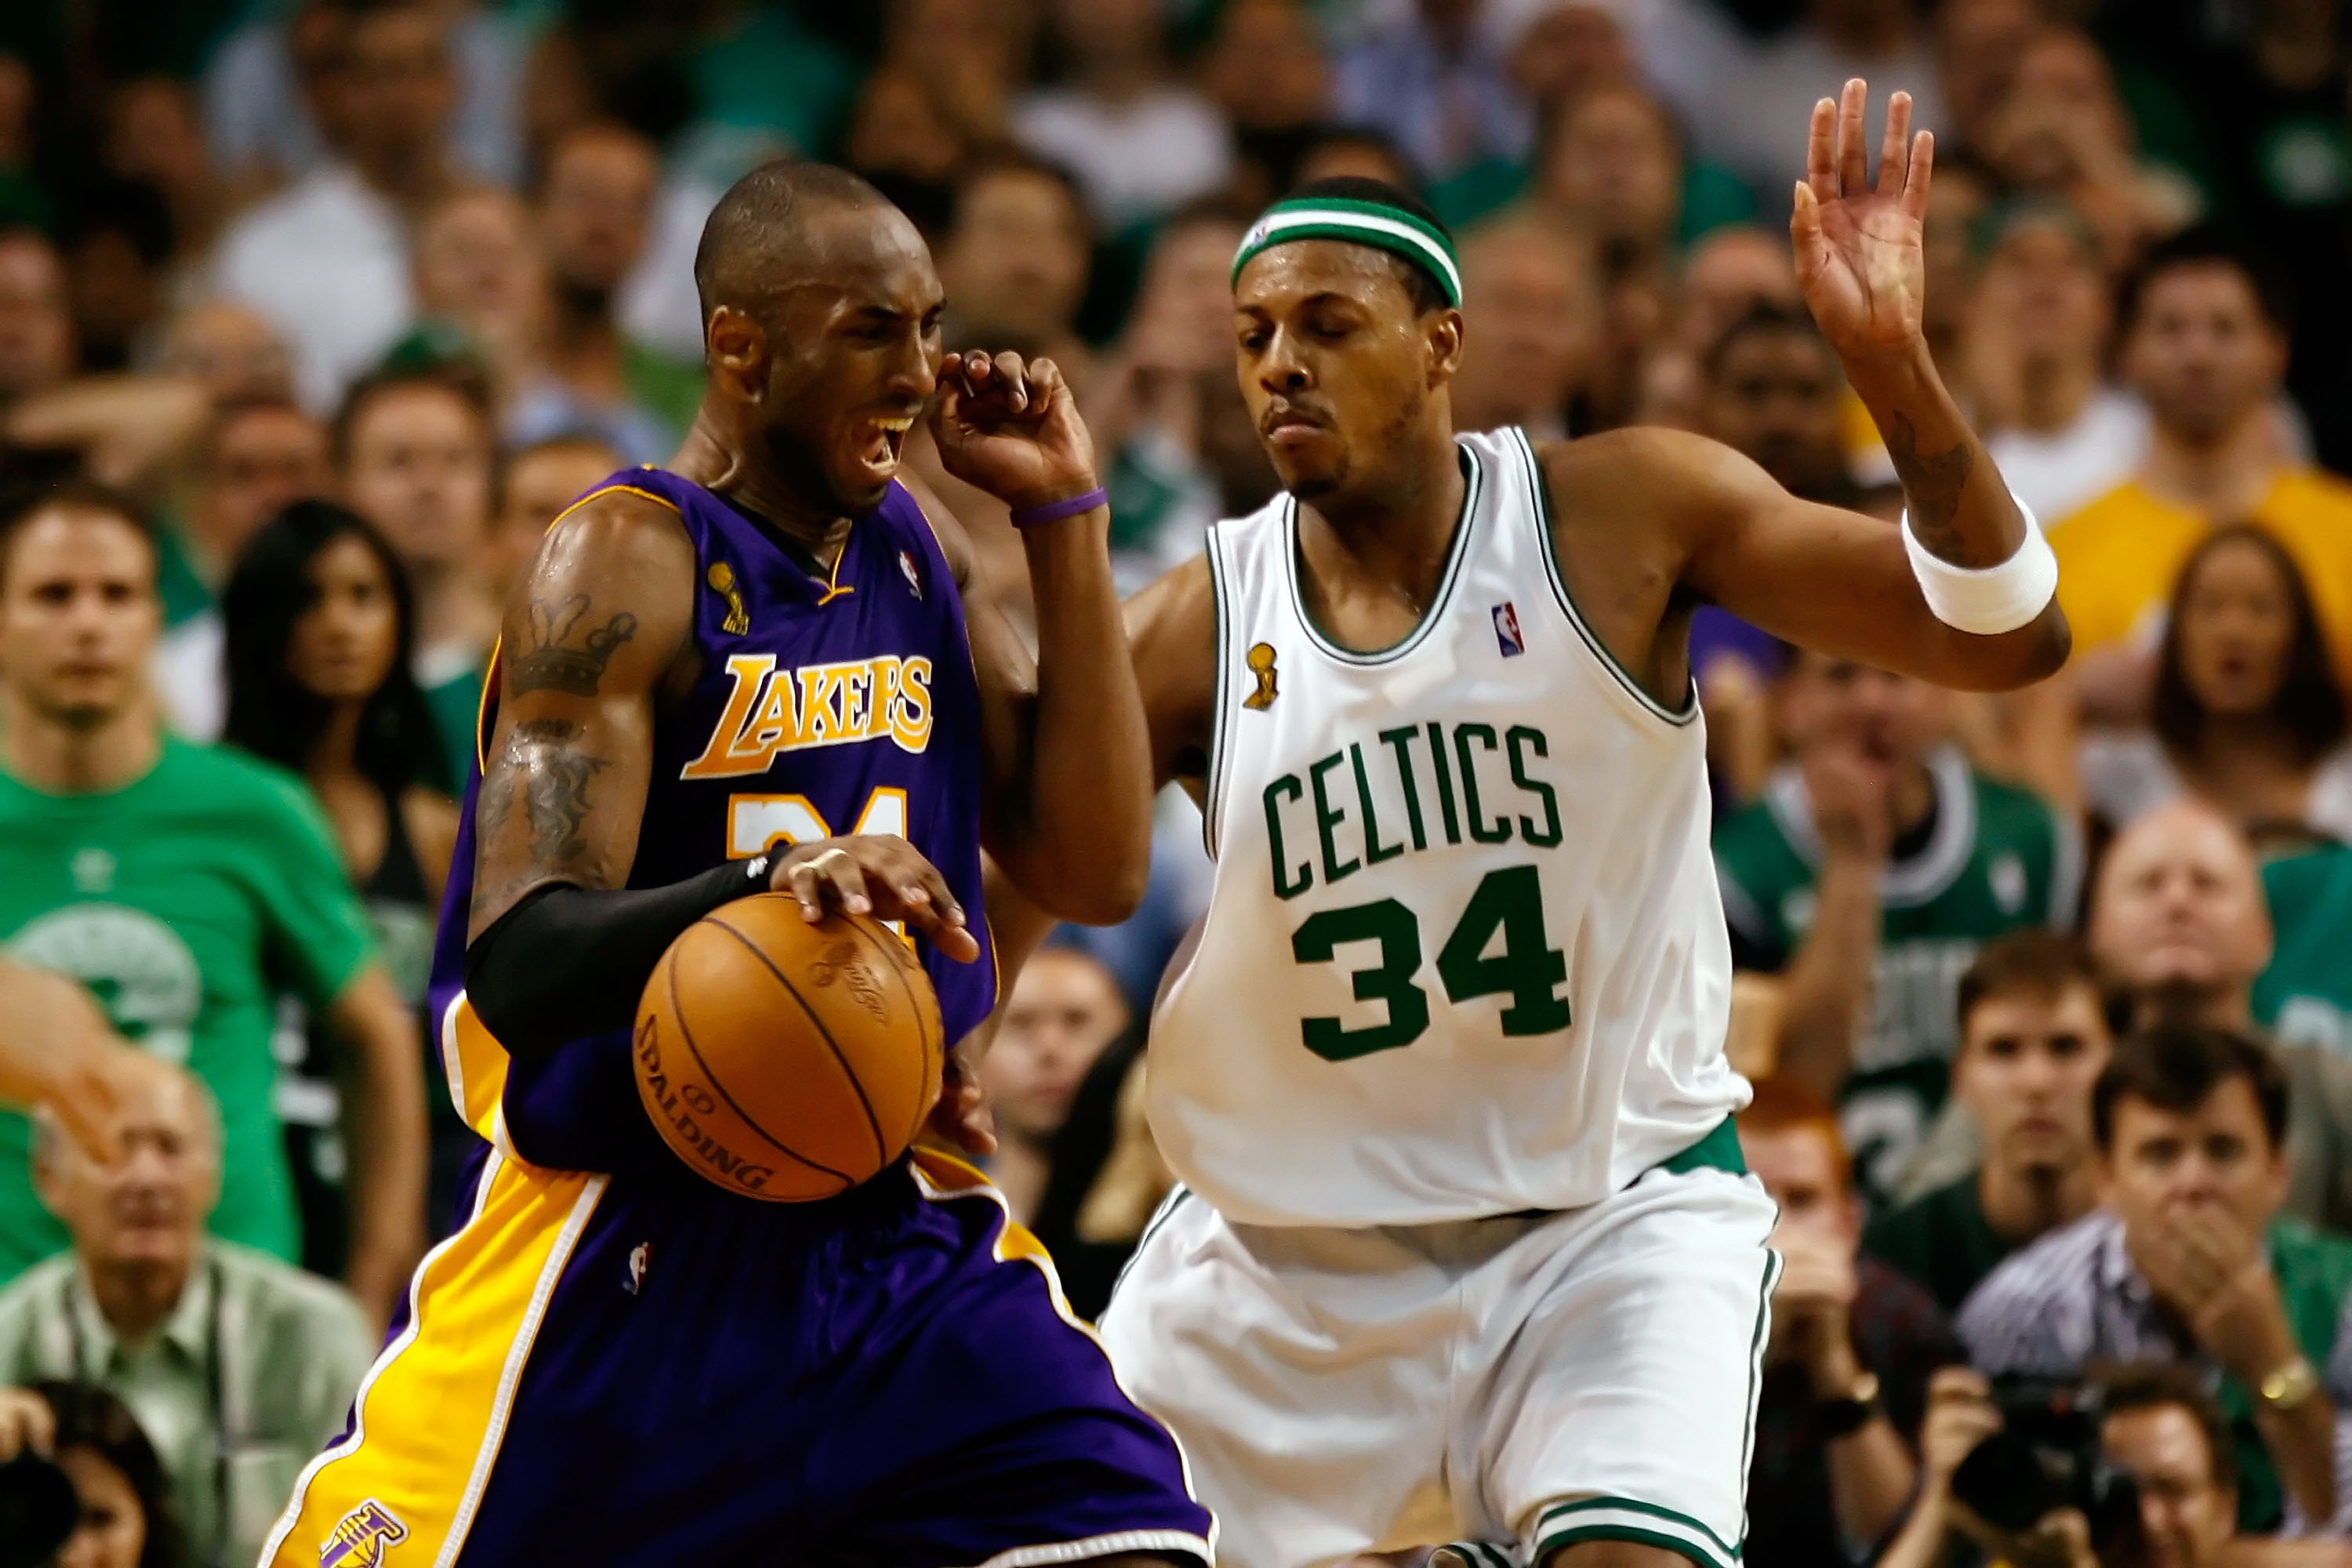 Celtics vs. Lakers 5 Fast Facts You Need to Know